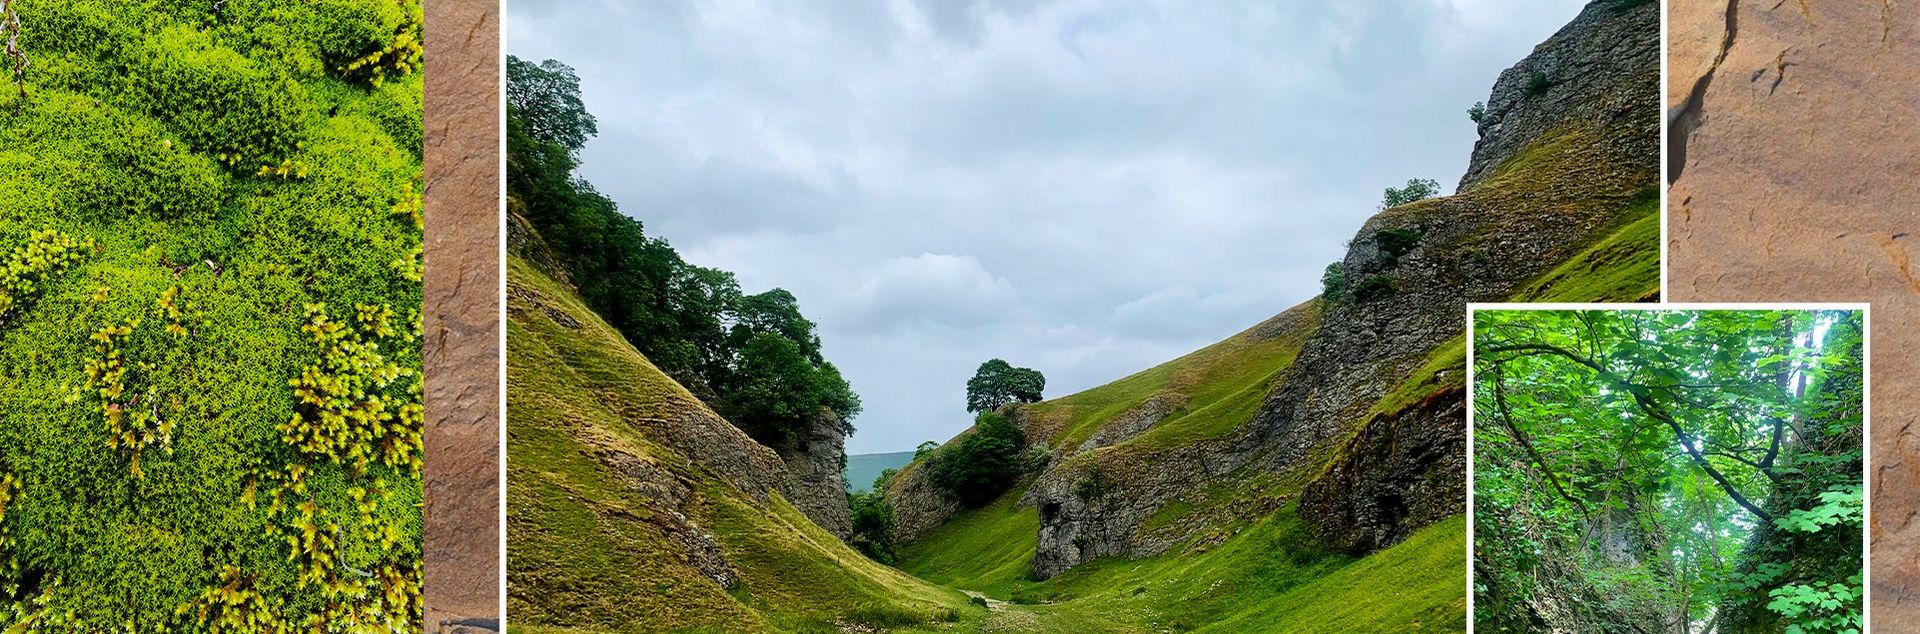 A selection of photos of the Back Way to Castleton walking trail in The Peak District